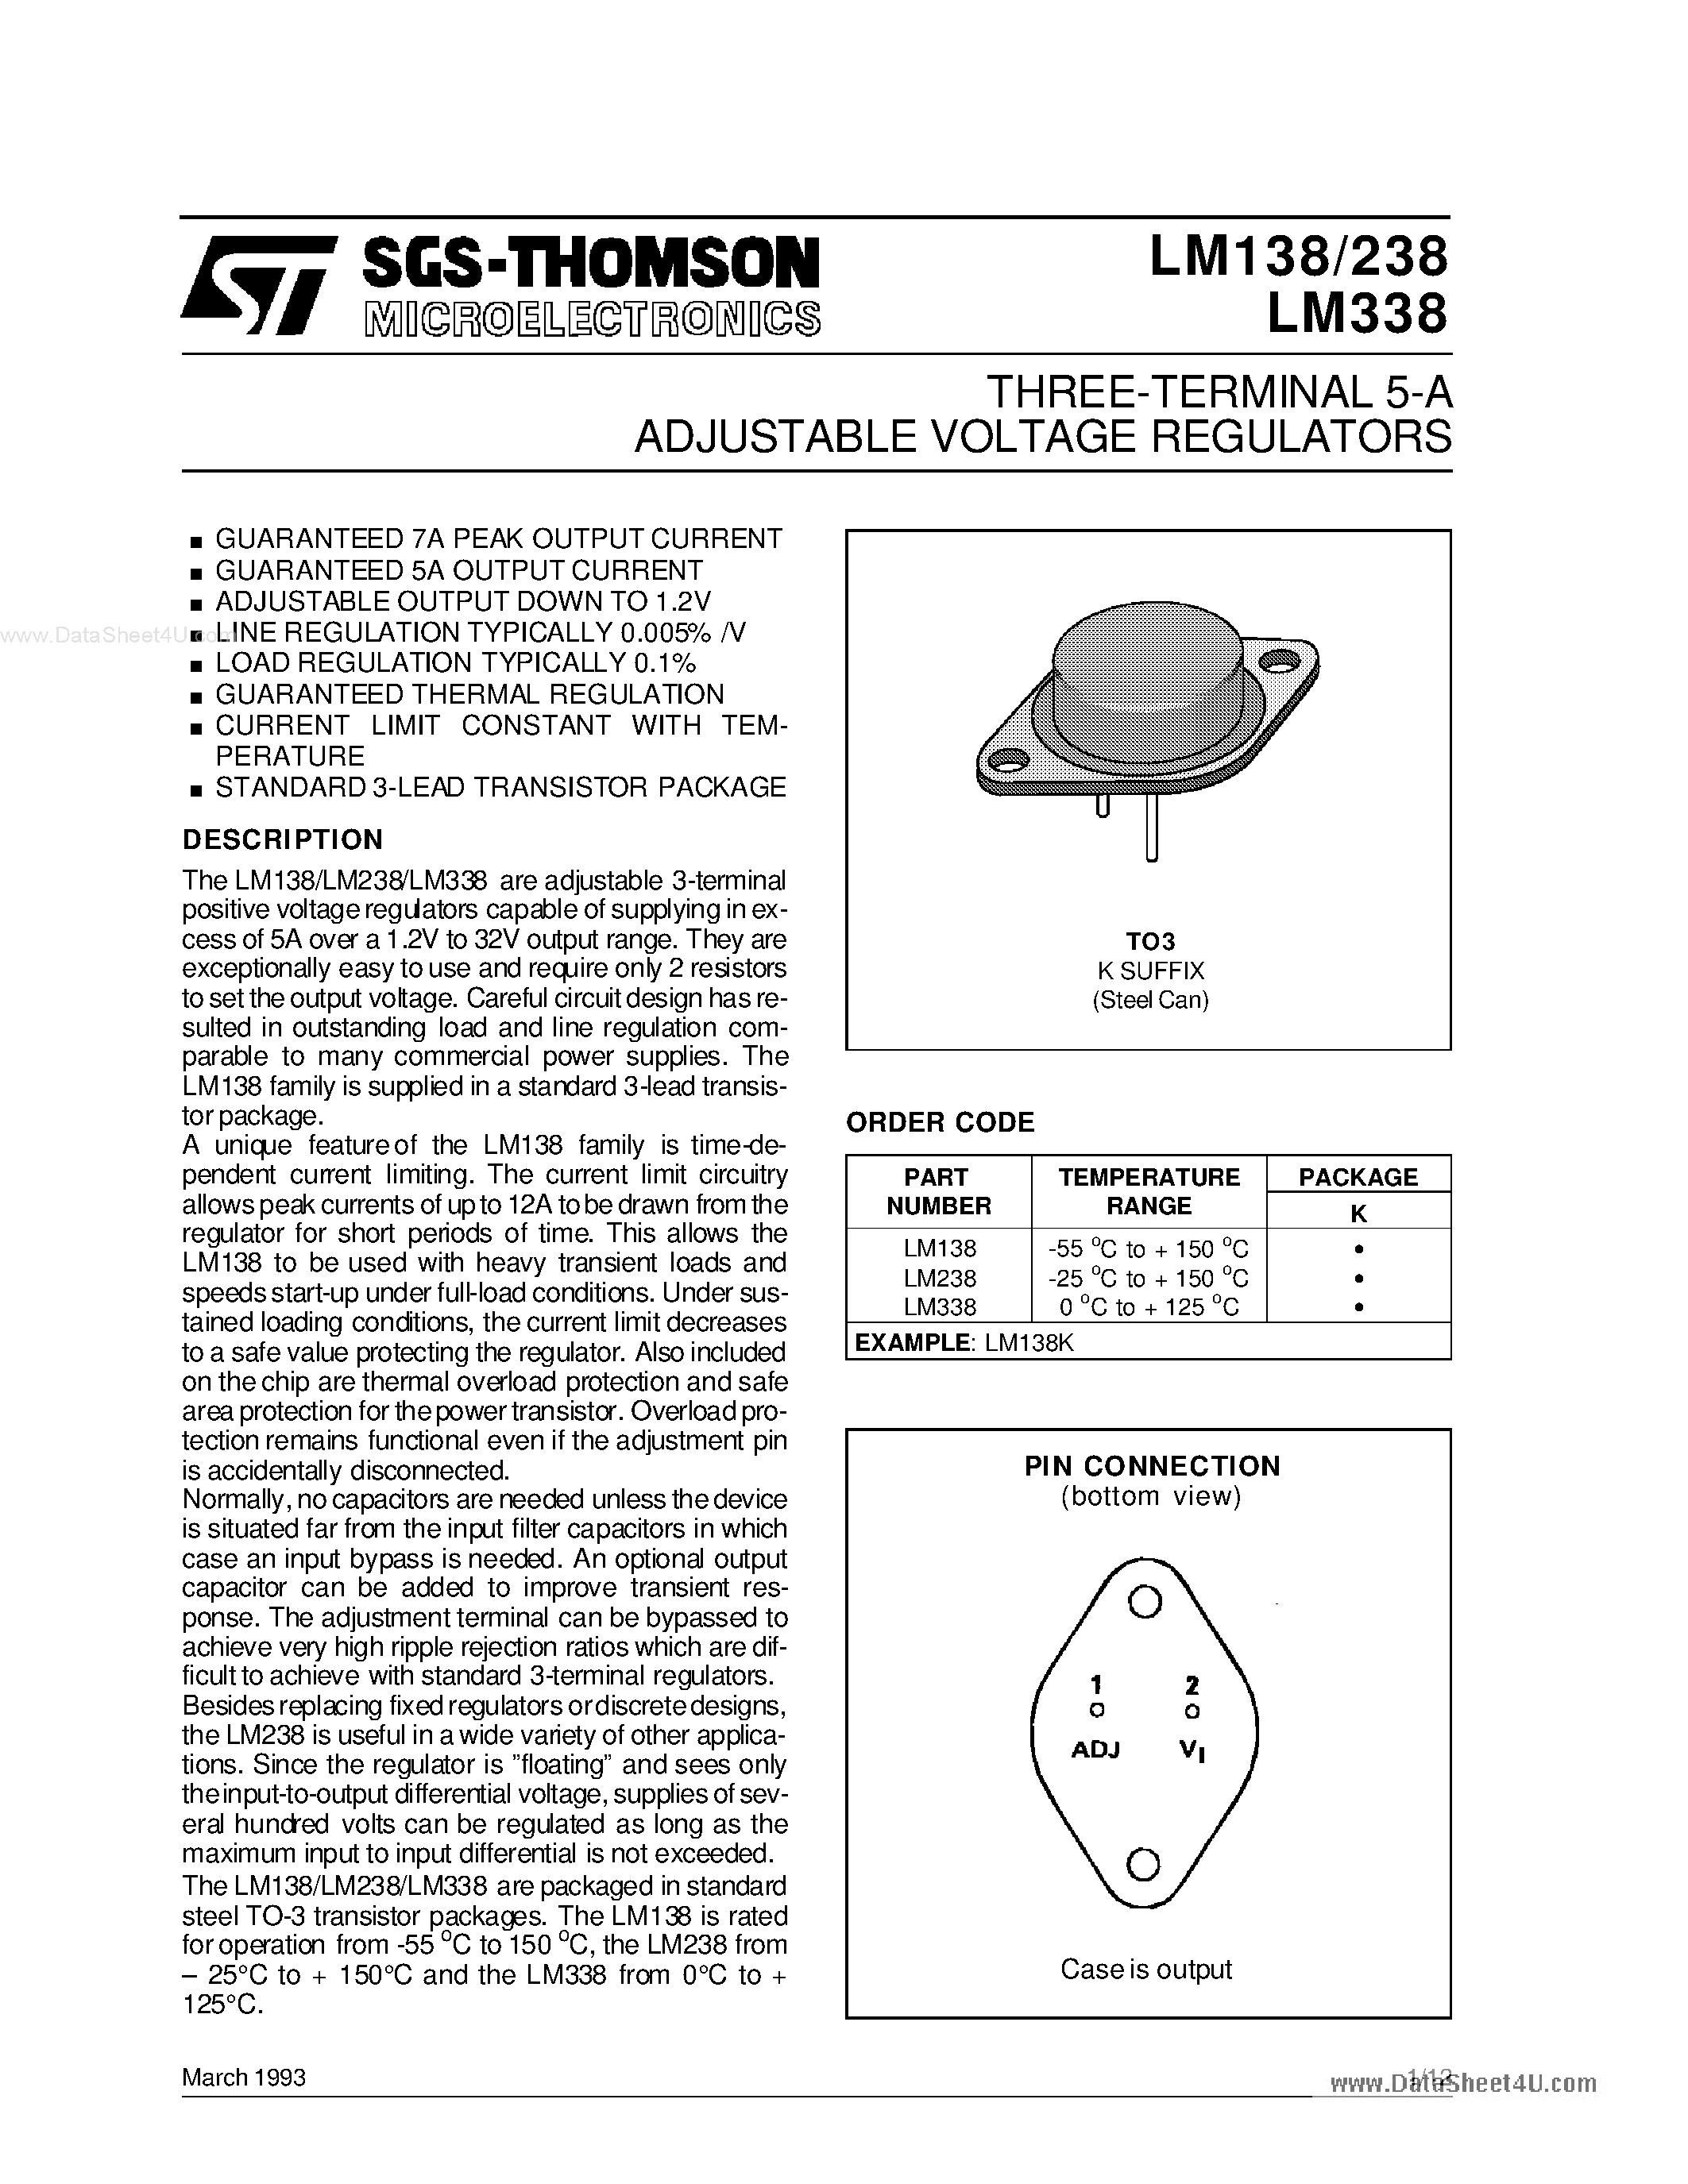 Datasheet LM-338K - Search ---> LM338K page 1